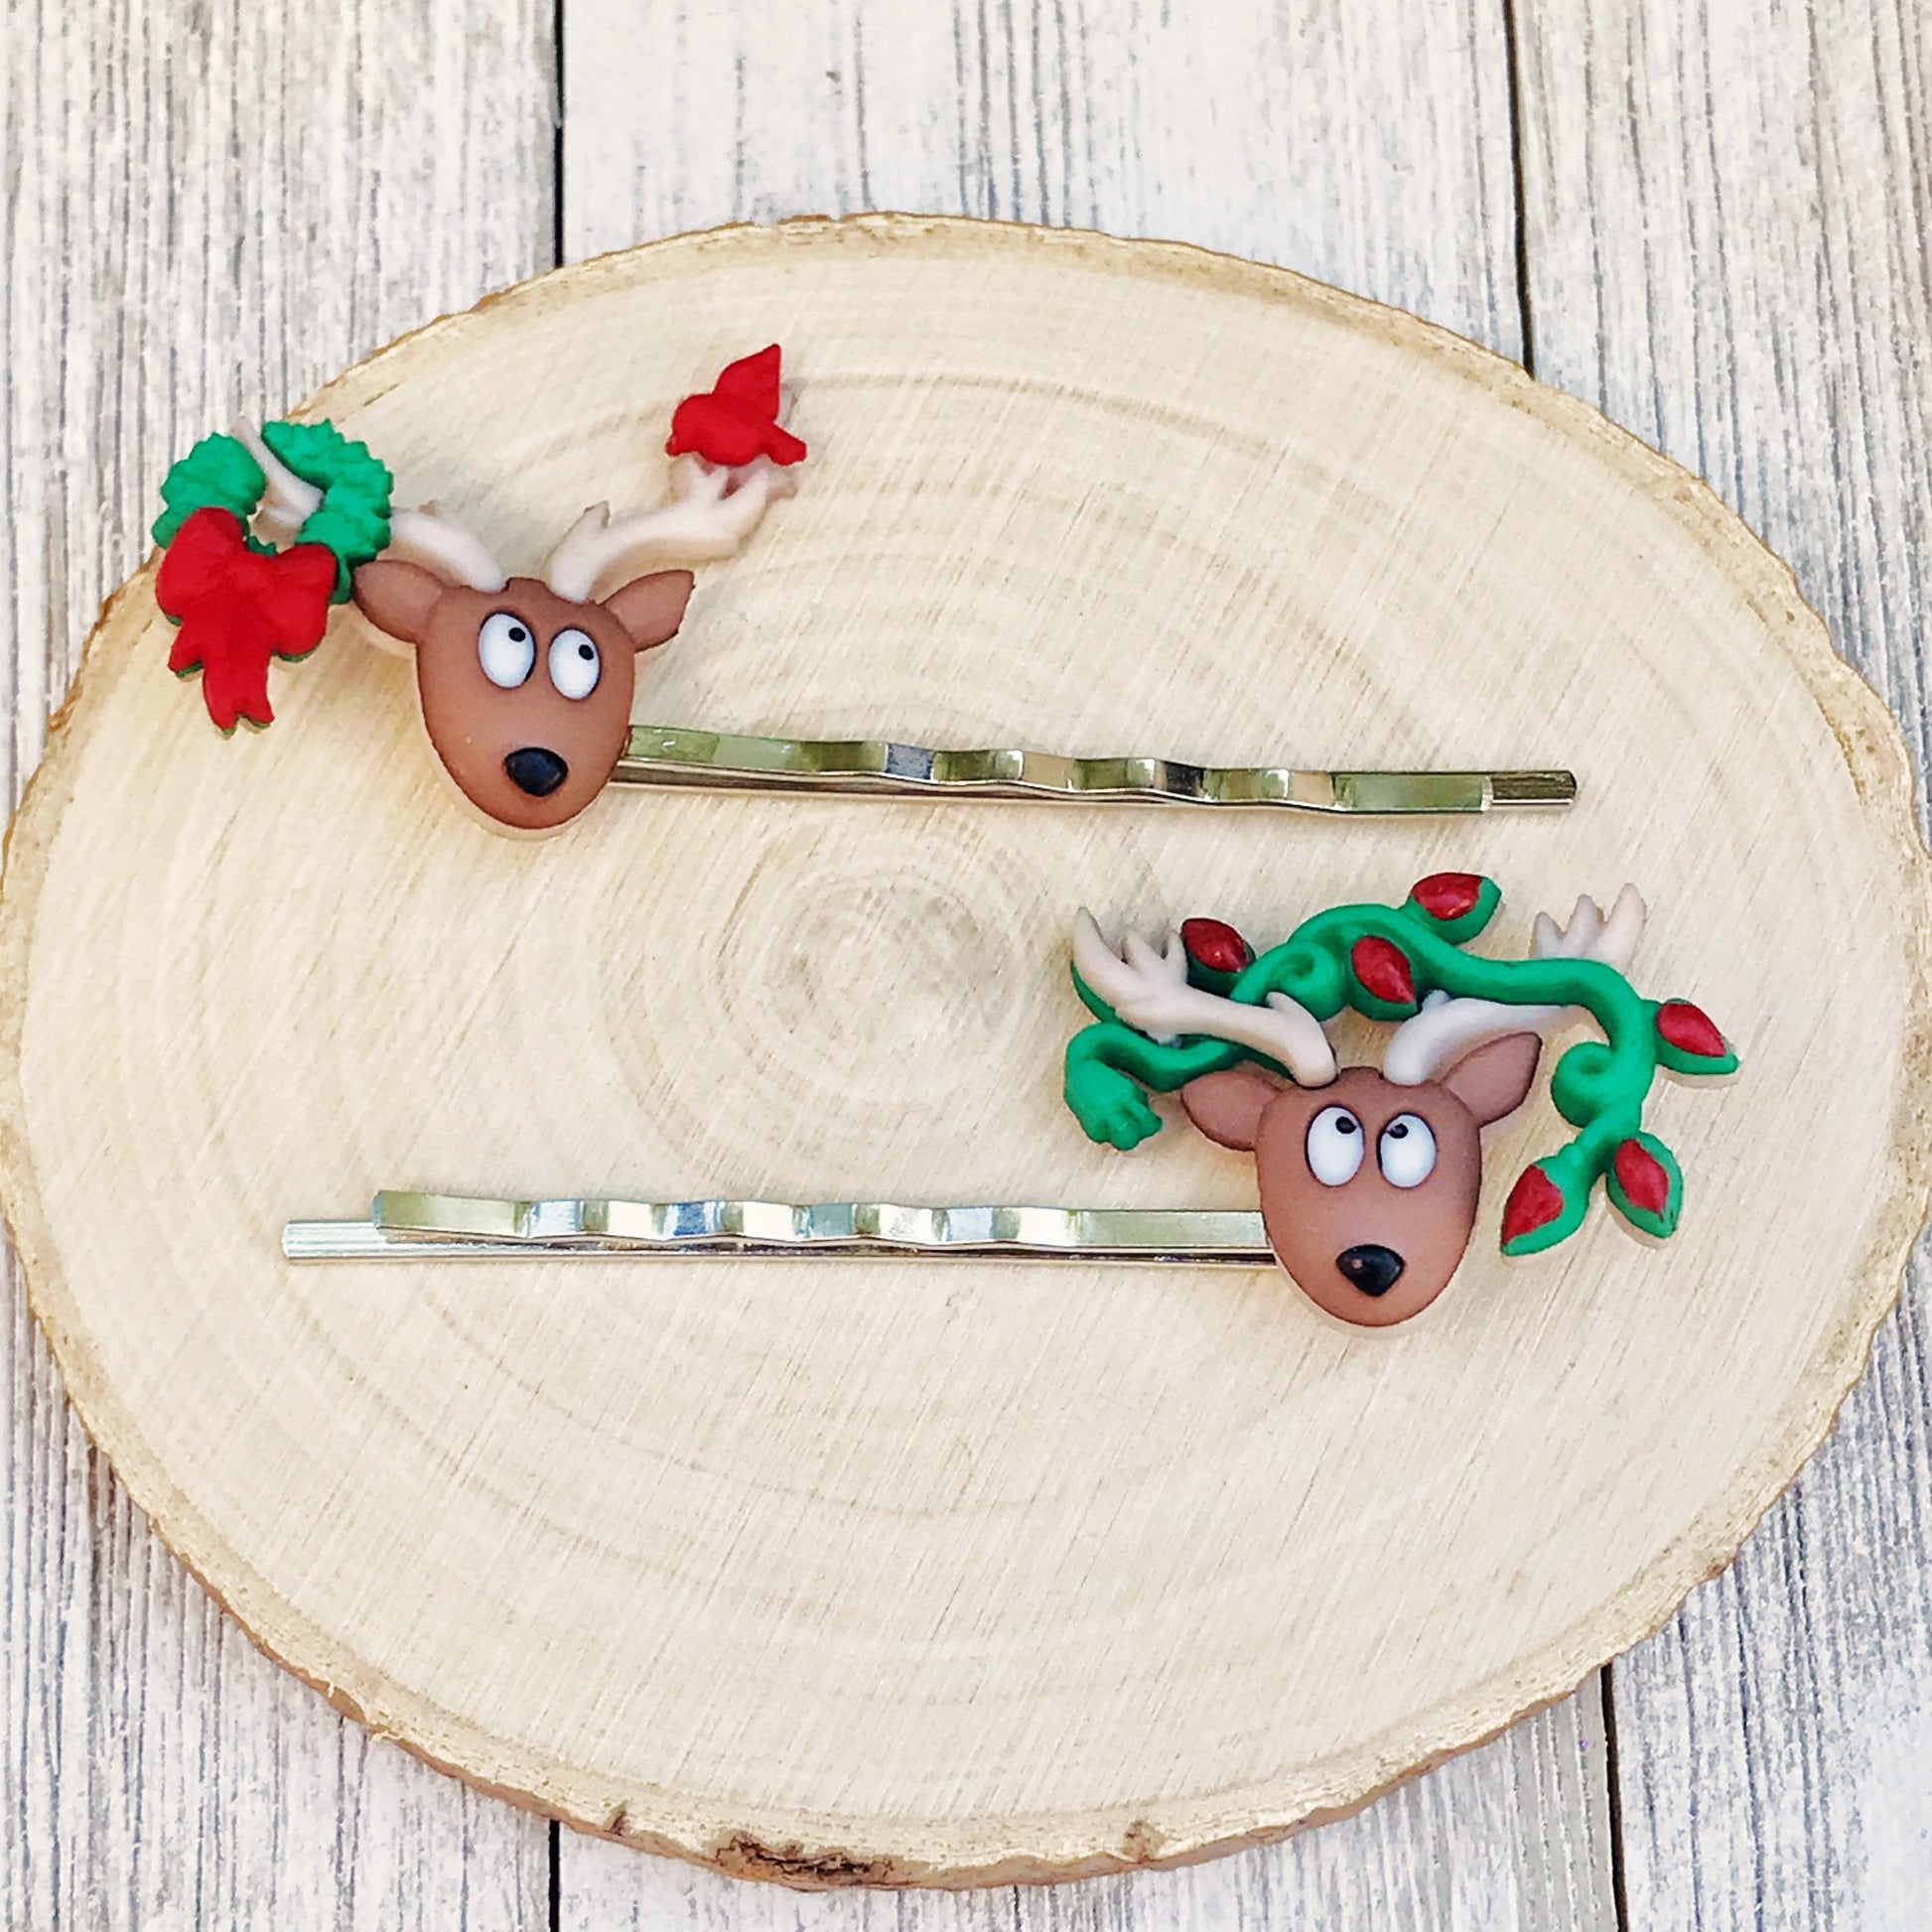 Reindeer with Wreath, Bird, & Light Strand Christmas Hair Pins: Whimsical Accessories for Festive Hairstyles